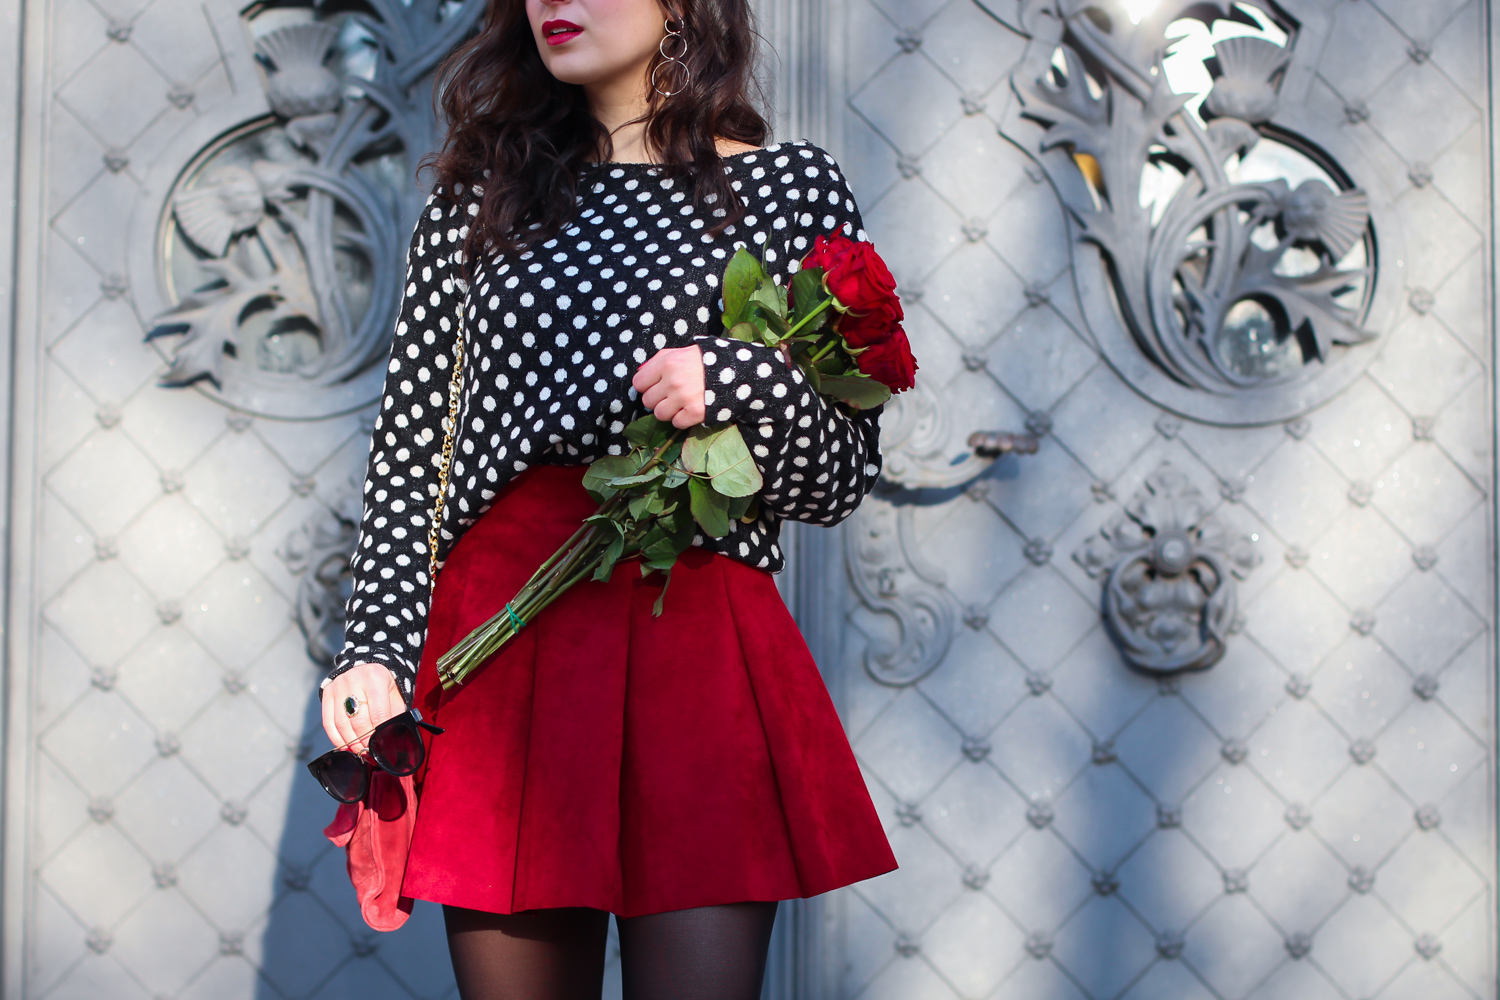 valentines day outfit inspiration romantic date outfit valentinstag red skater skirt and dots modeblog berlin fashionblog samieze winterlook-2